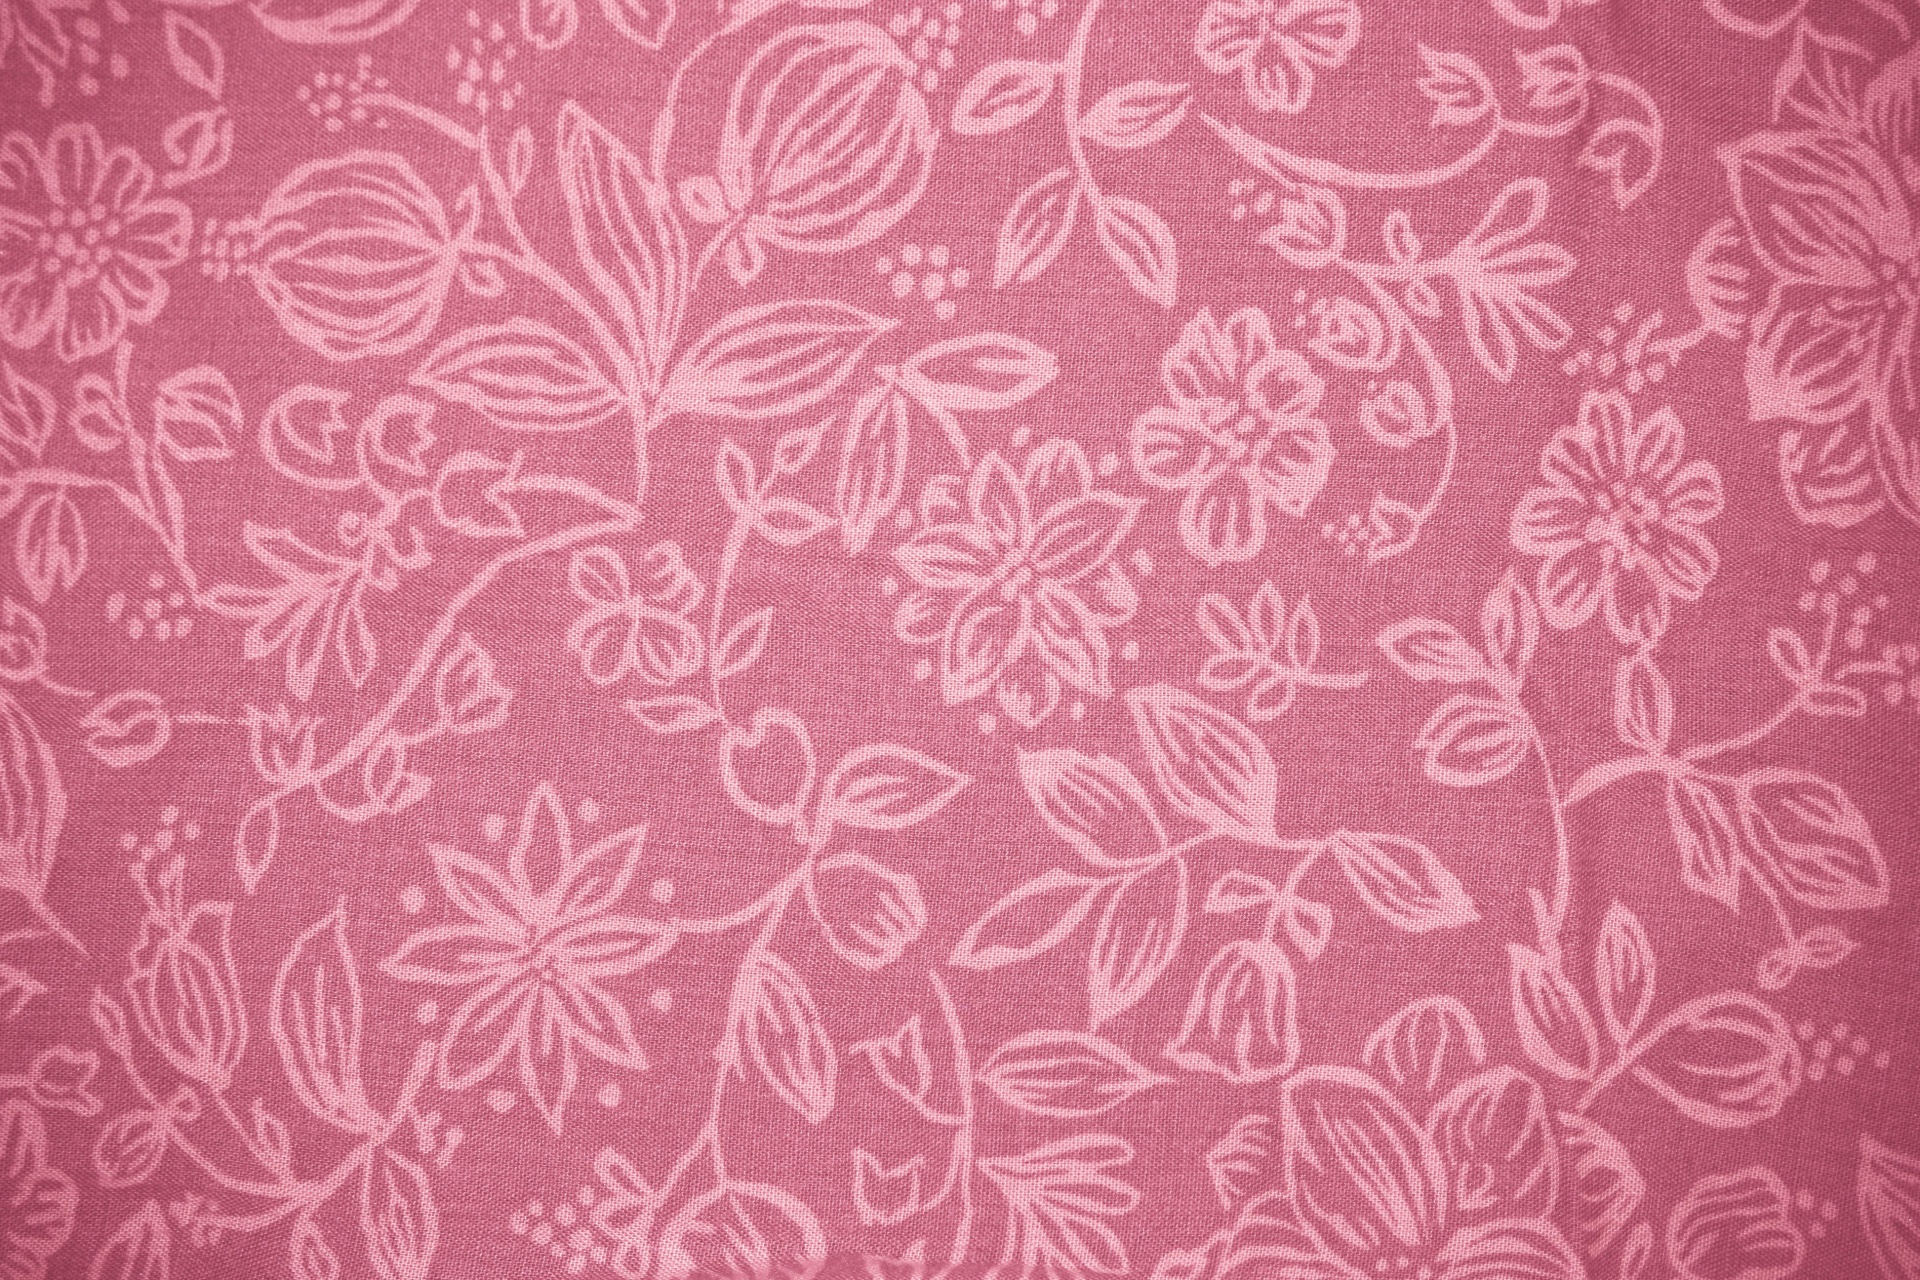 Coral Pink Flowered Fabric